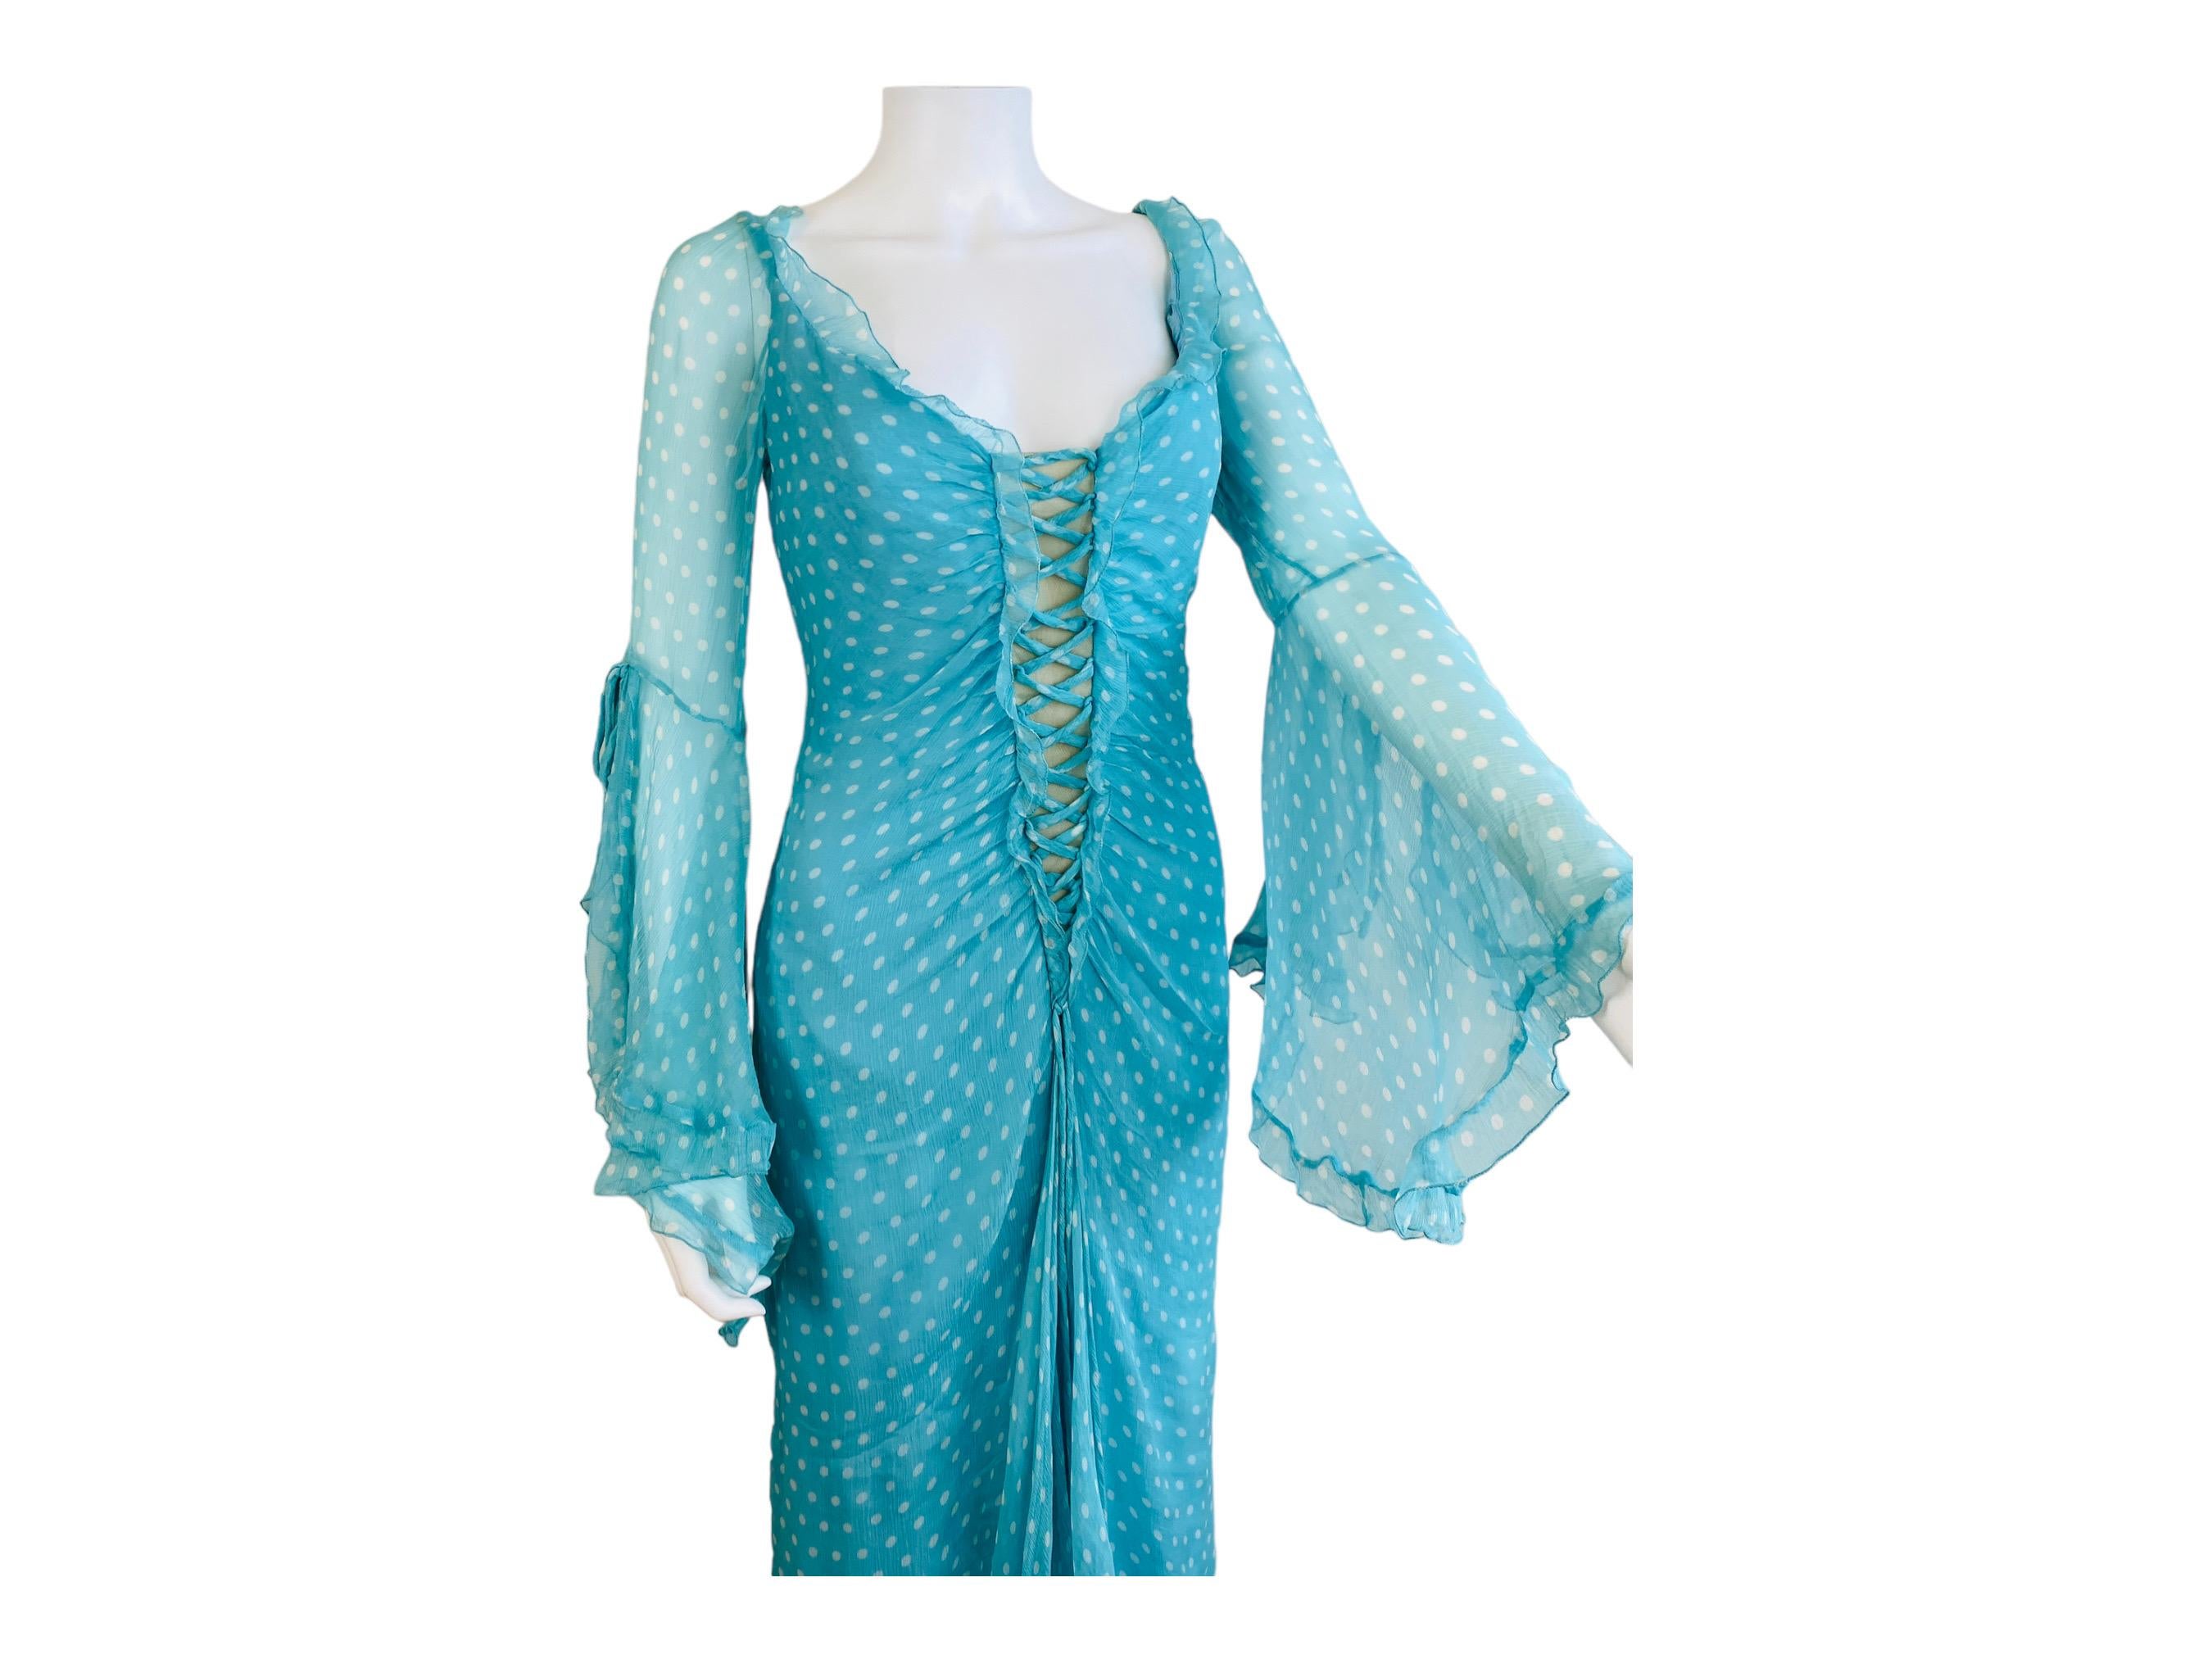 Vintage Bellville Sassoon Turquoise Blue Polka Dot Silk Gown Dress For Sale 3